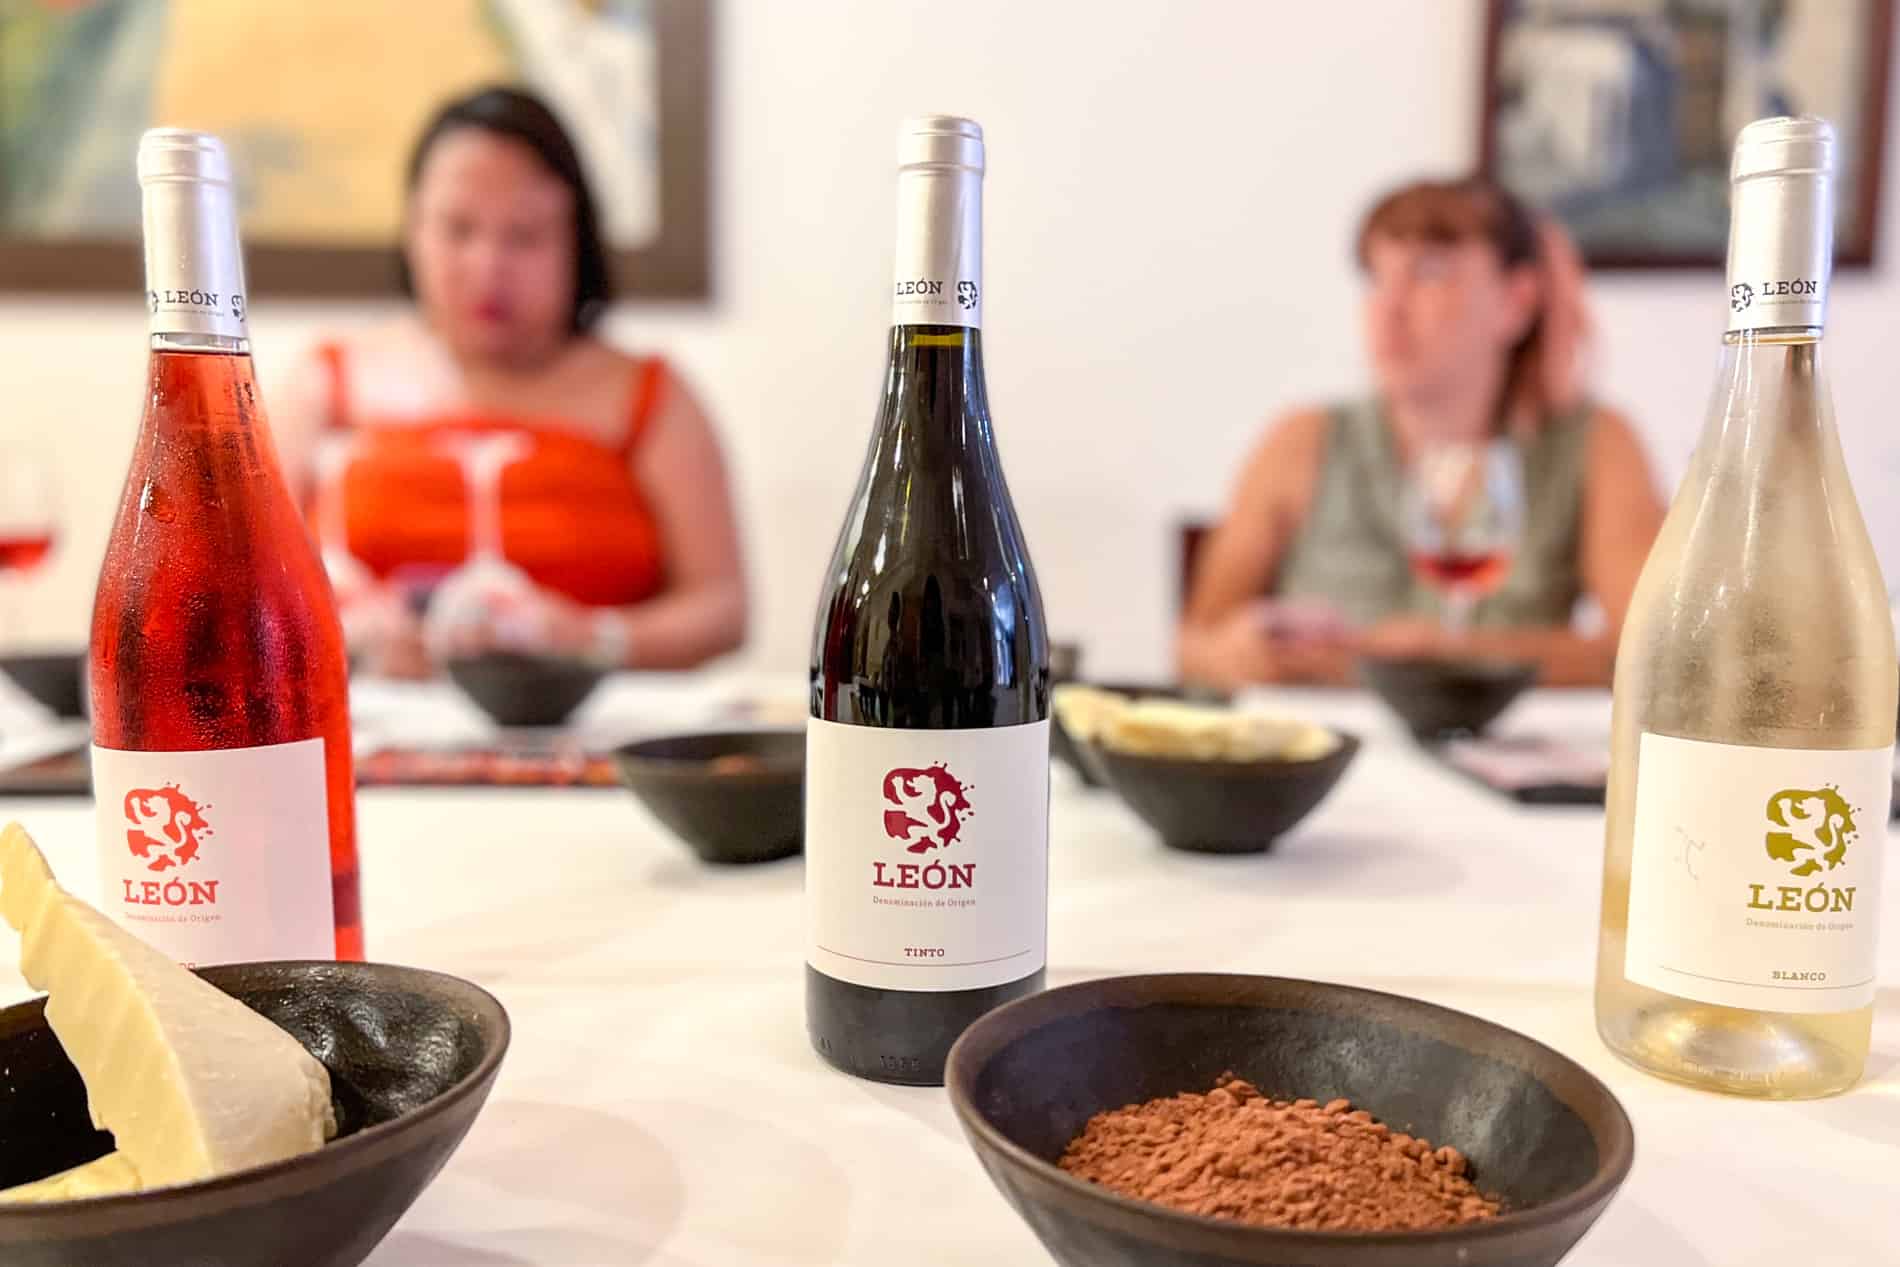 A rose, red and white bottle of wine wlabelled 'León' behind bowls of cacao butter and power and in front of the blurred silhouette of two women sitting at the table. 